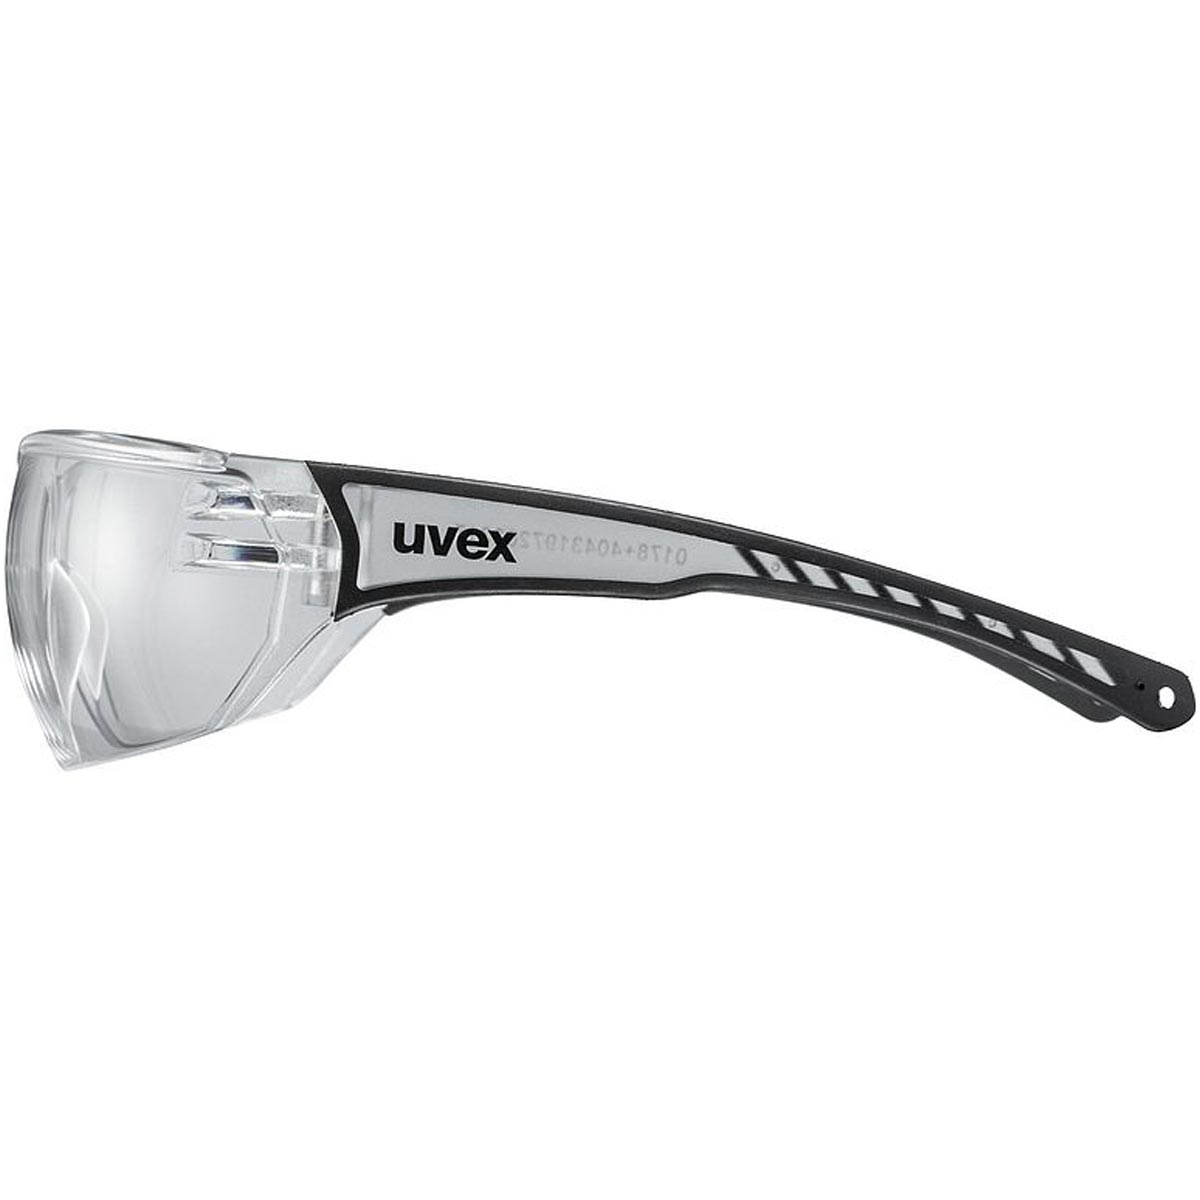 Uvex goggles Sportstyle 204 clear